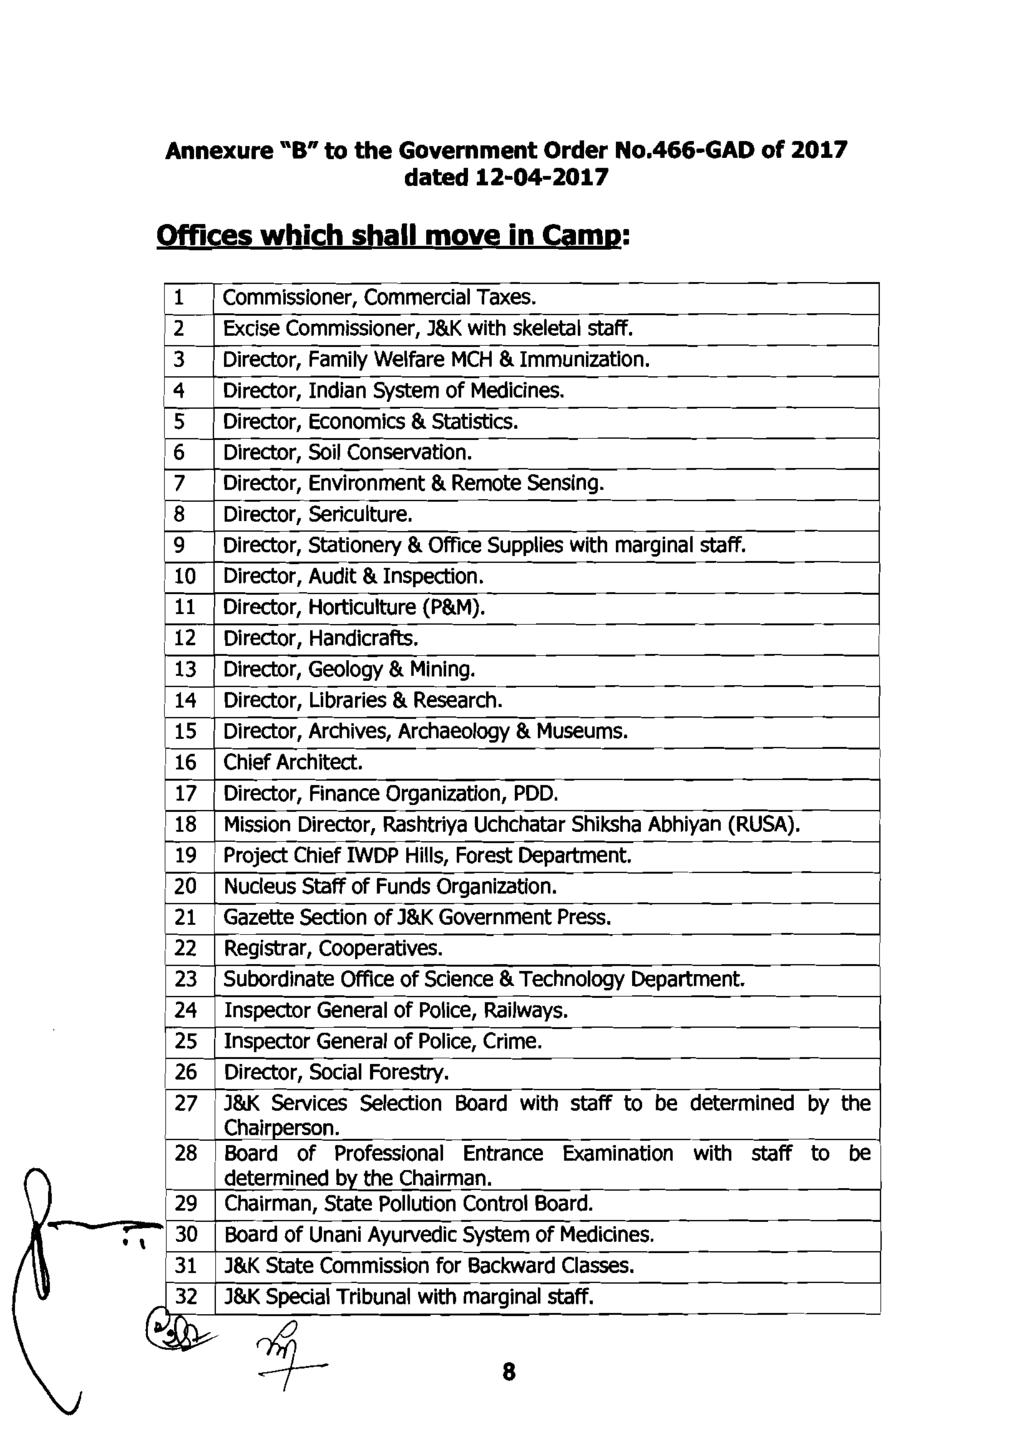 ~ ~ Annexure 'B" to the Government Order No.466-GAD of 2017 dated 12-04-2017 Offices which shall move in Camg: 1 1 1 Commissioner.. Commercial -~ Taxes. 2 -- - -- ~~~missioner~~ w i t h staff.